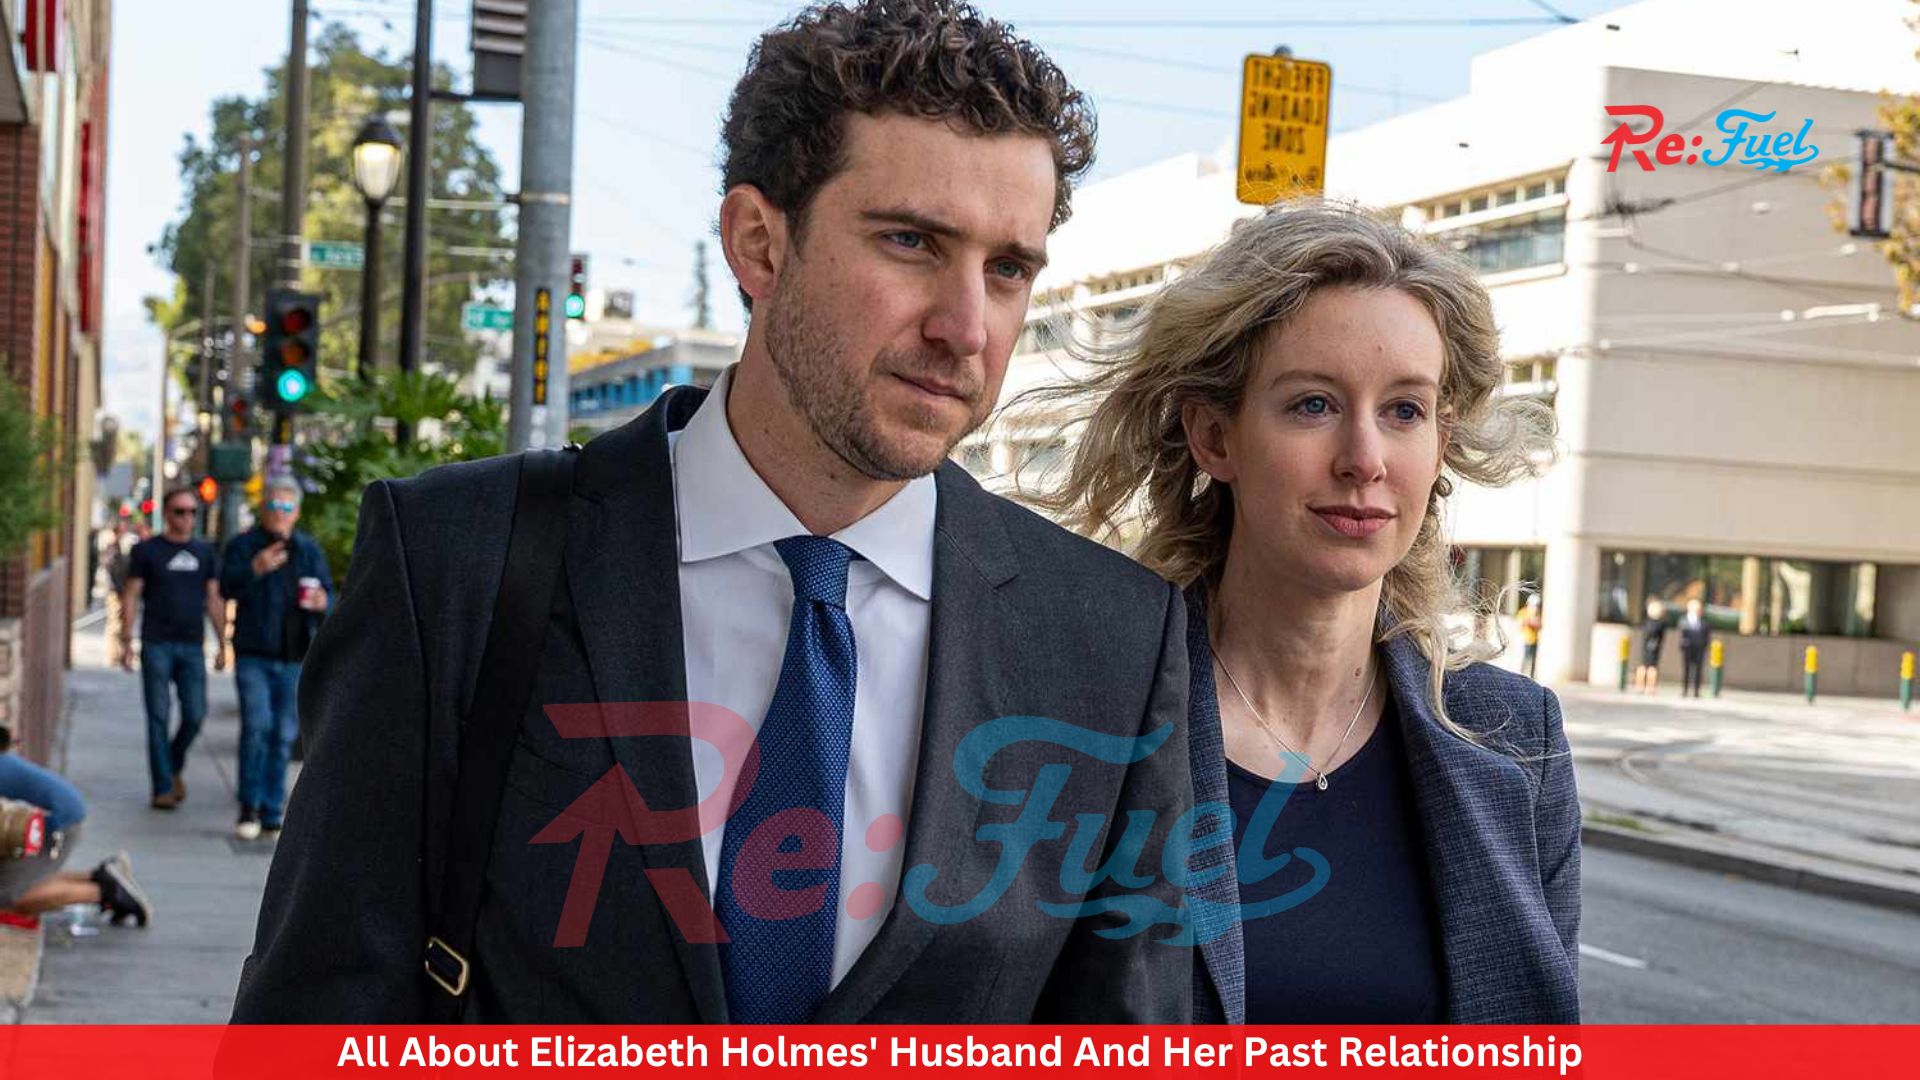 All About Elizabeth Holmes' Husband And Her Past Relationship